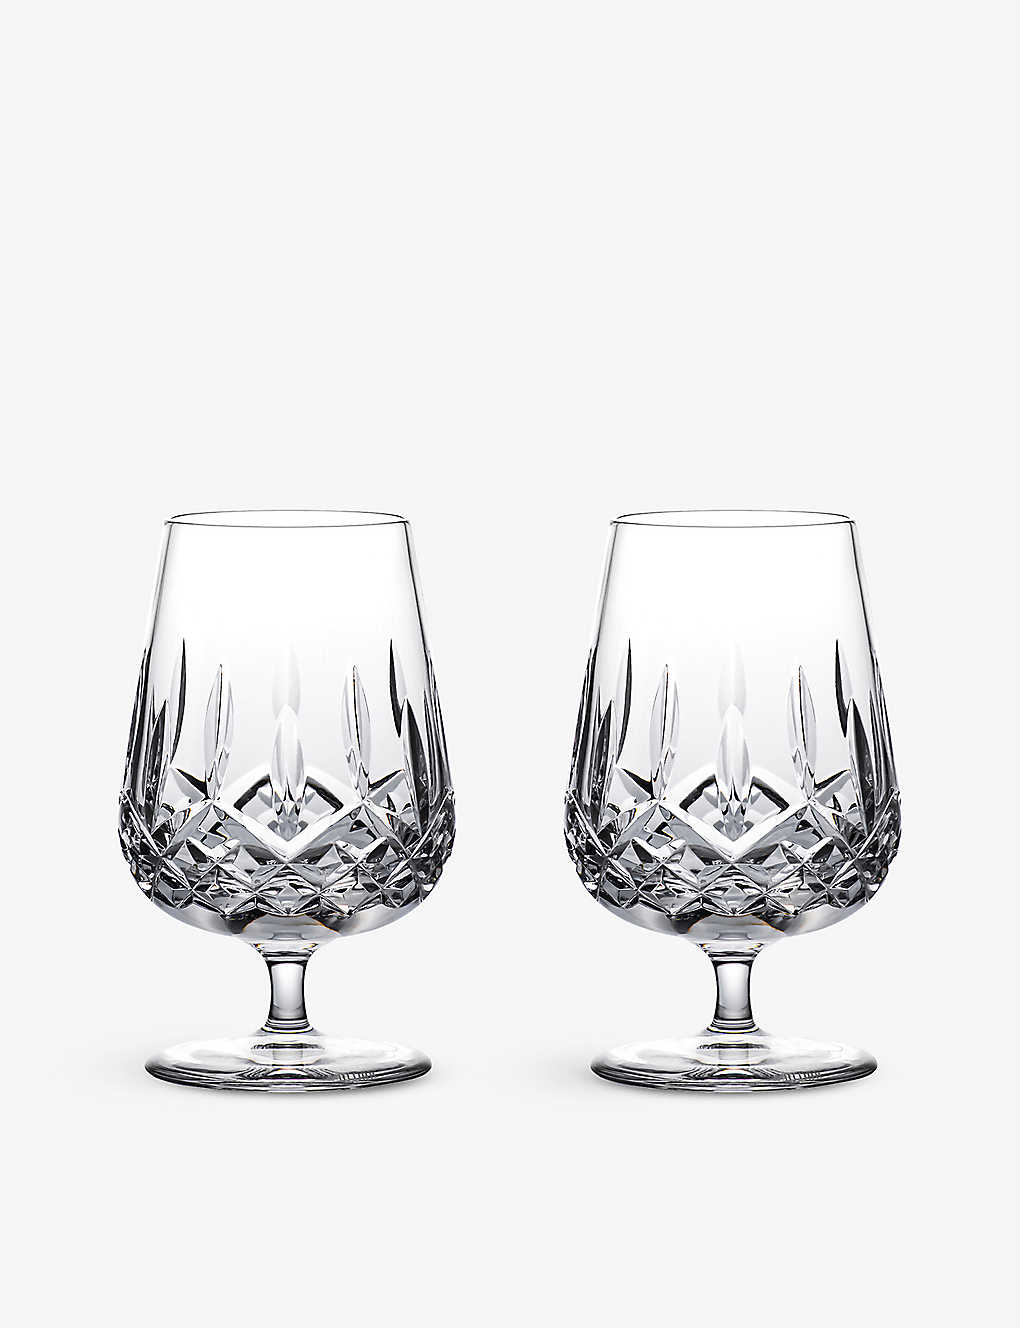 Waterford Connoisseur Lismore Snifter-cap Crystal Tumblers